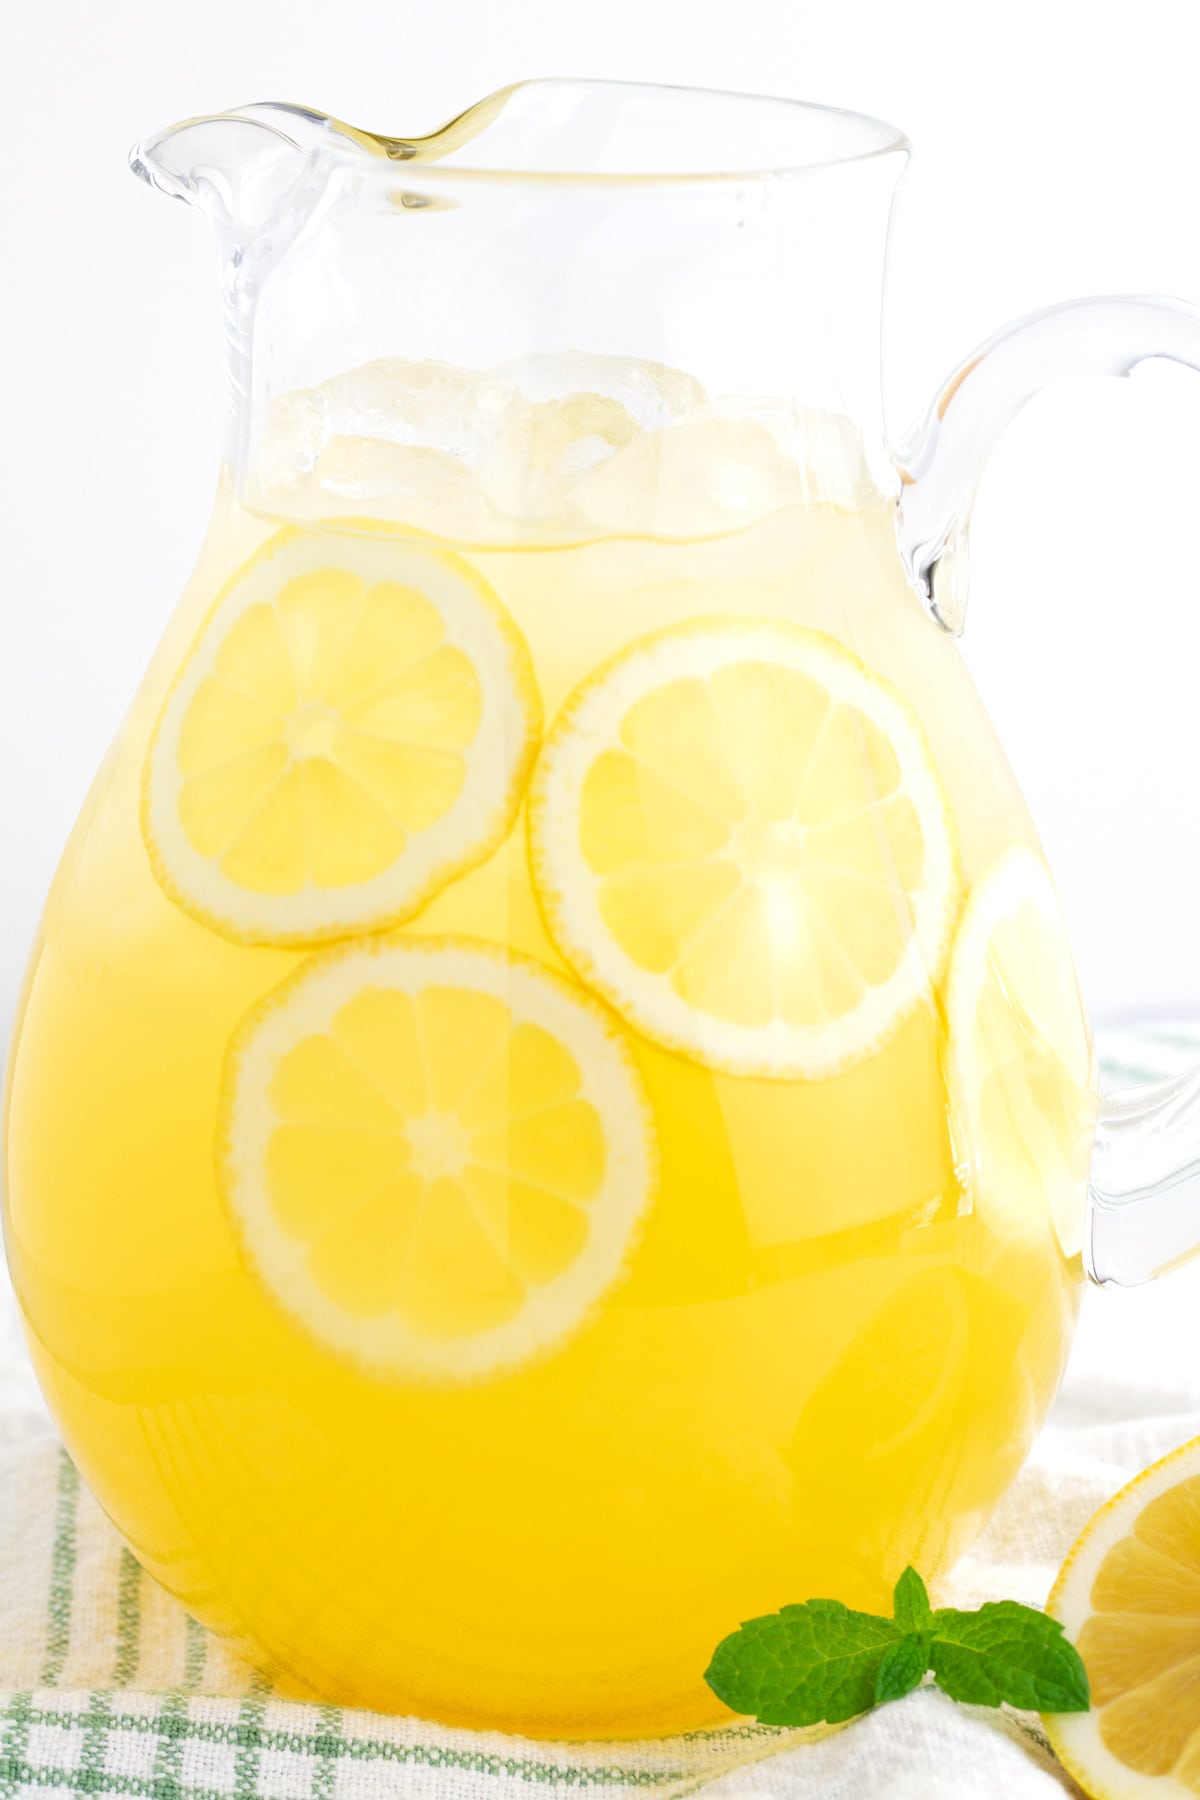 Glass pitcher of lemonade with lemonade slices inside and fresh mint laying on the side.